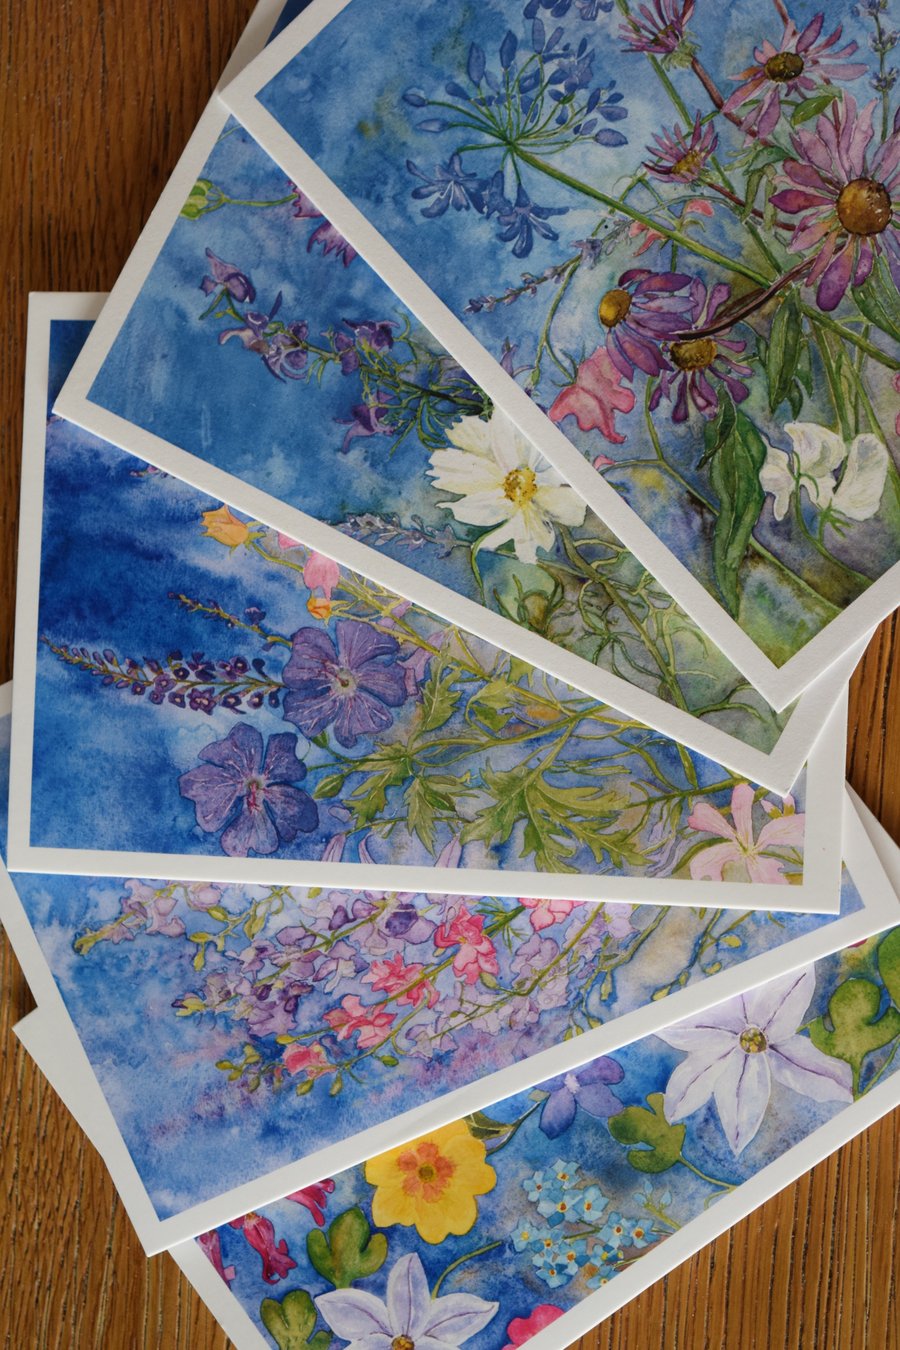 Pack of 5 Botanical Greetings Cards - Tangled Garden Blue Series